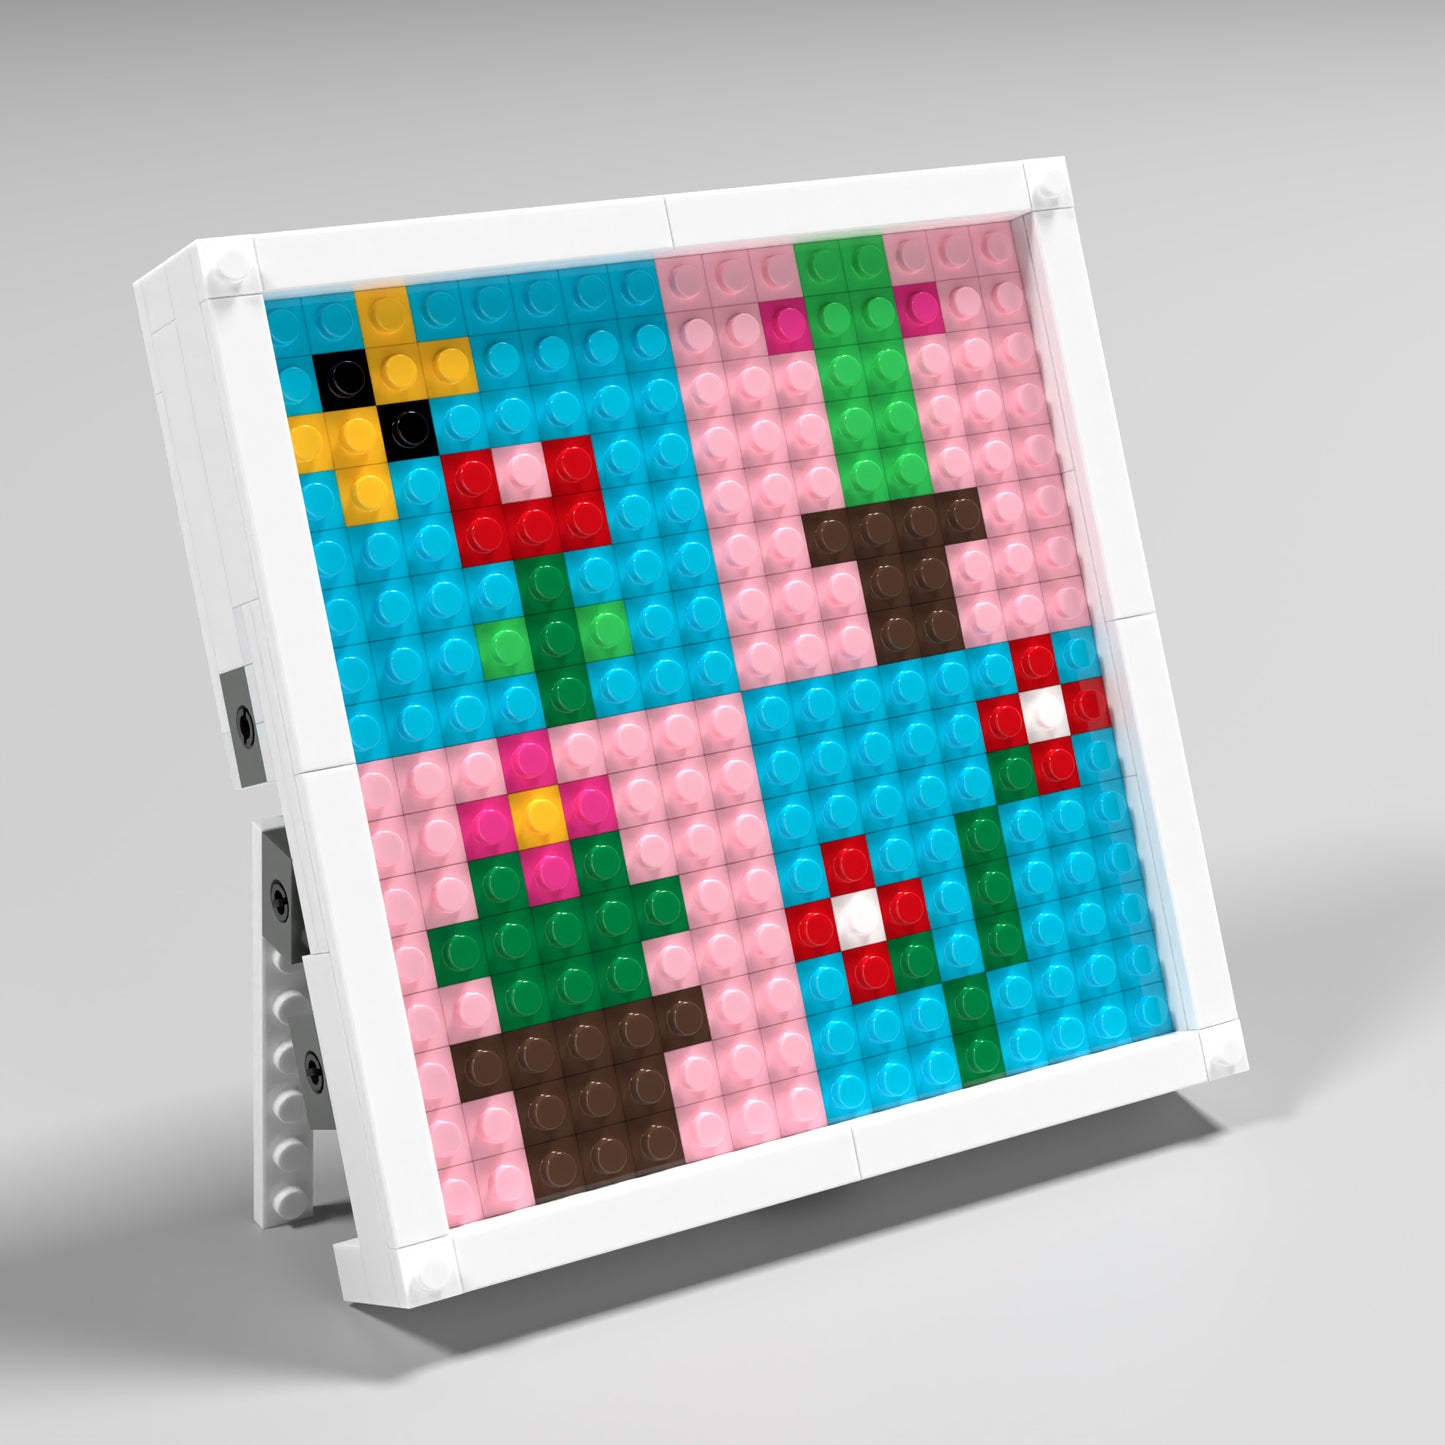 Pixel Art of 4 Pots of Flowers Compatible Lego Set - A Botanical Decoration to Refresh Your Space